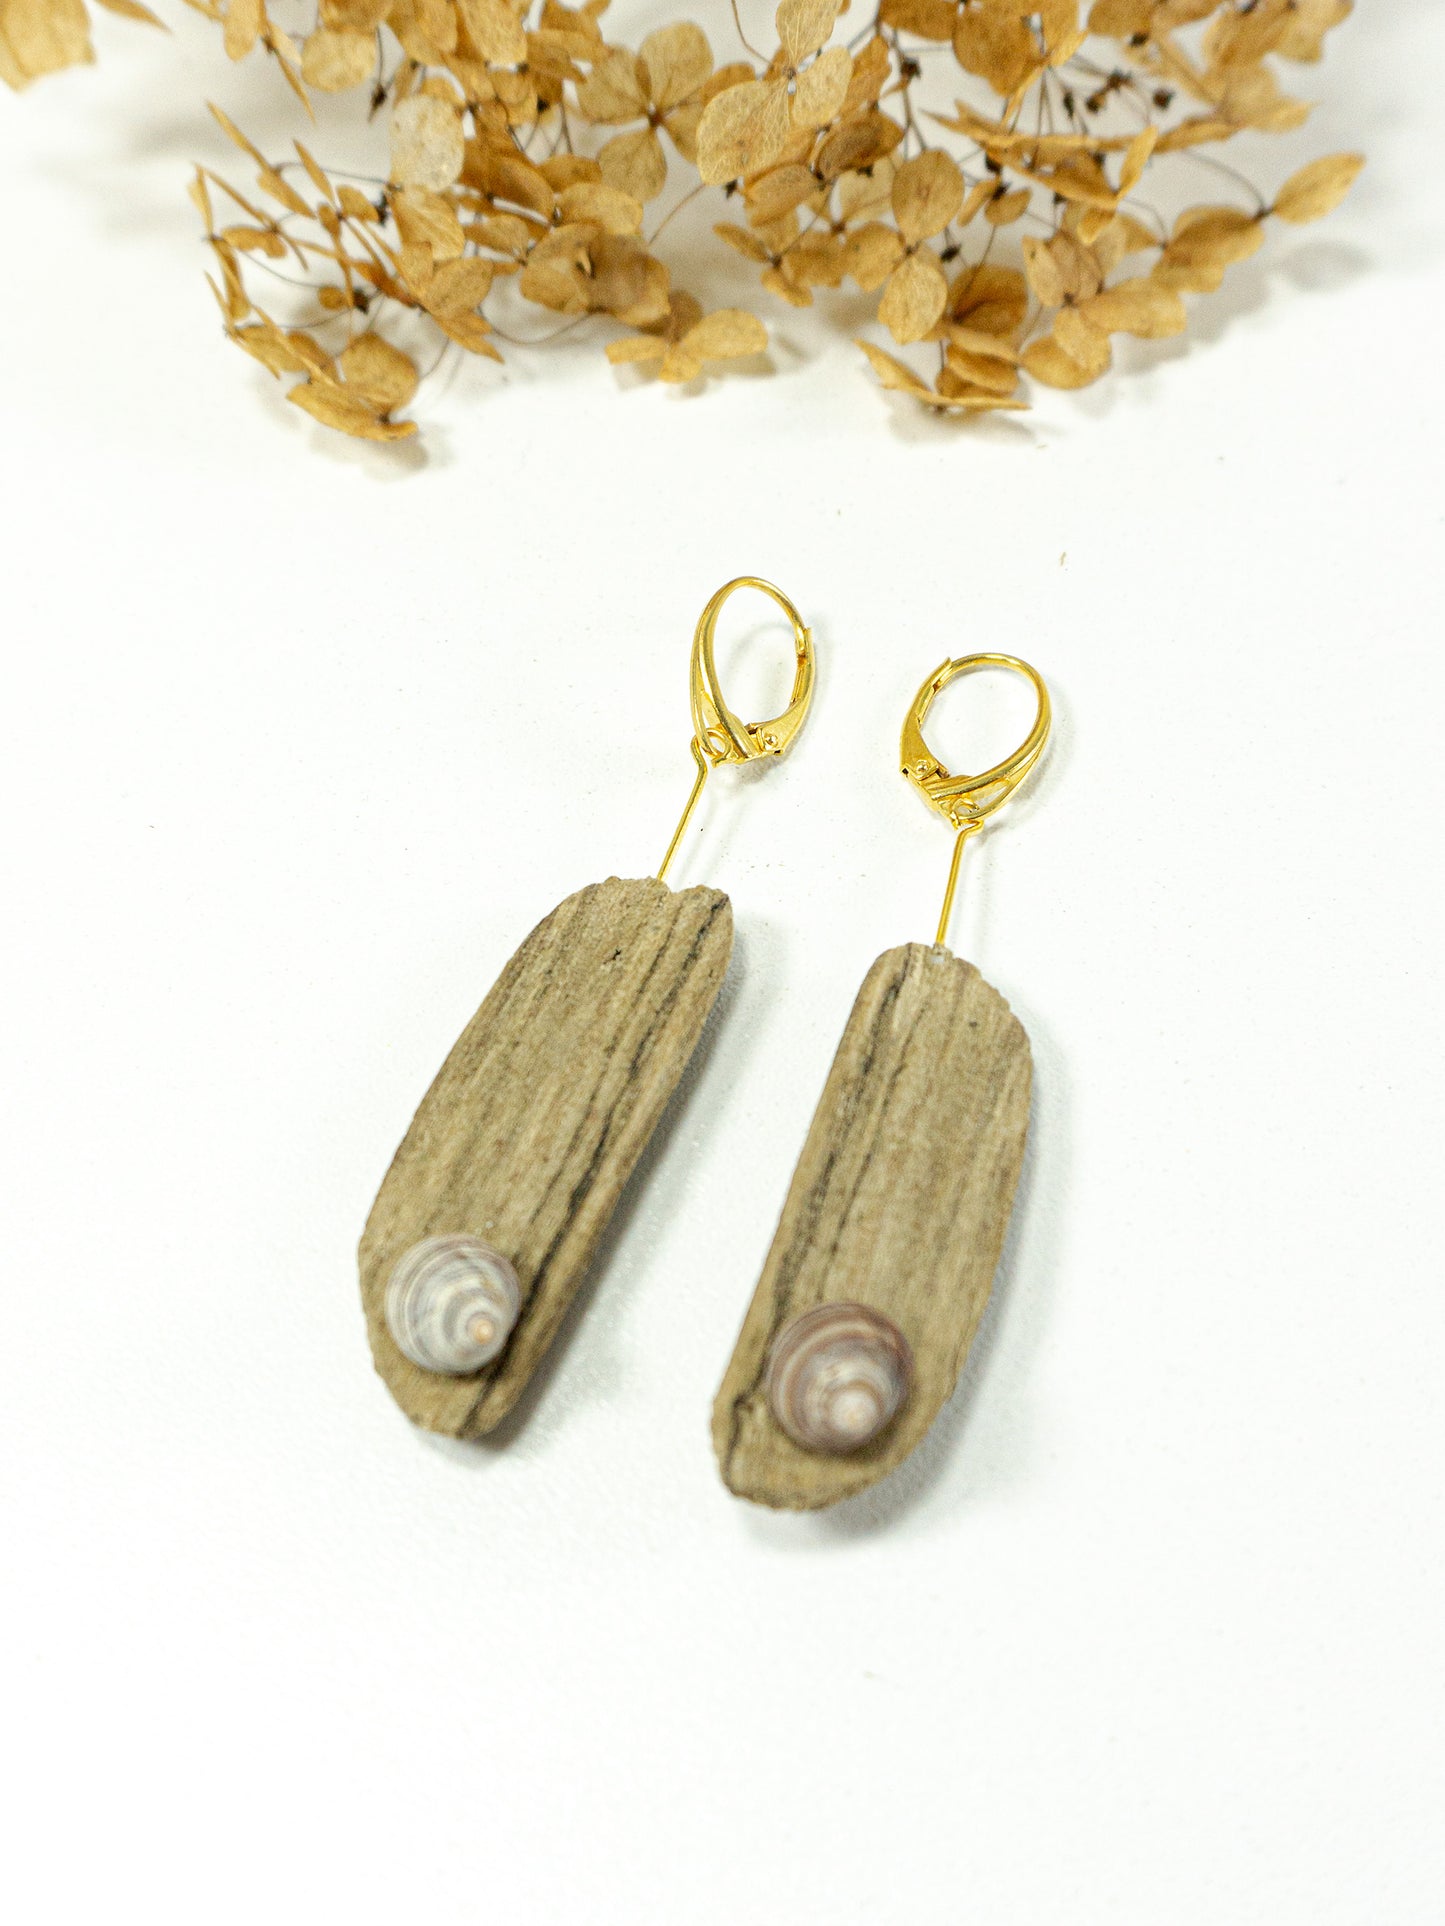 Unique Driftwood Earrings SABINE with Seashells and gold-plated 925 Silver